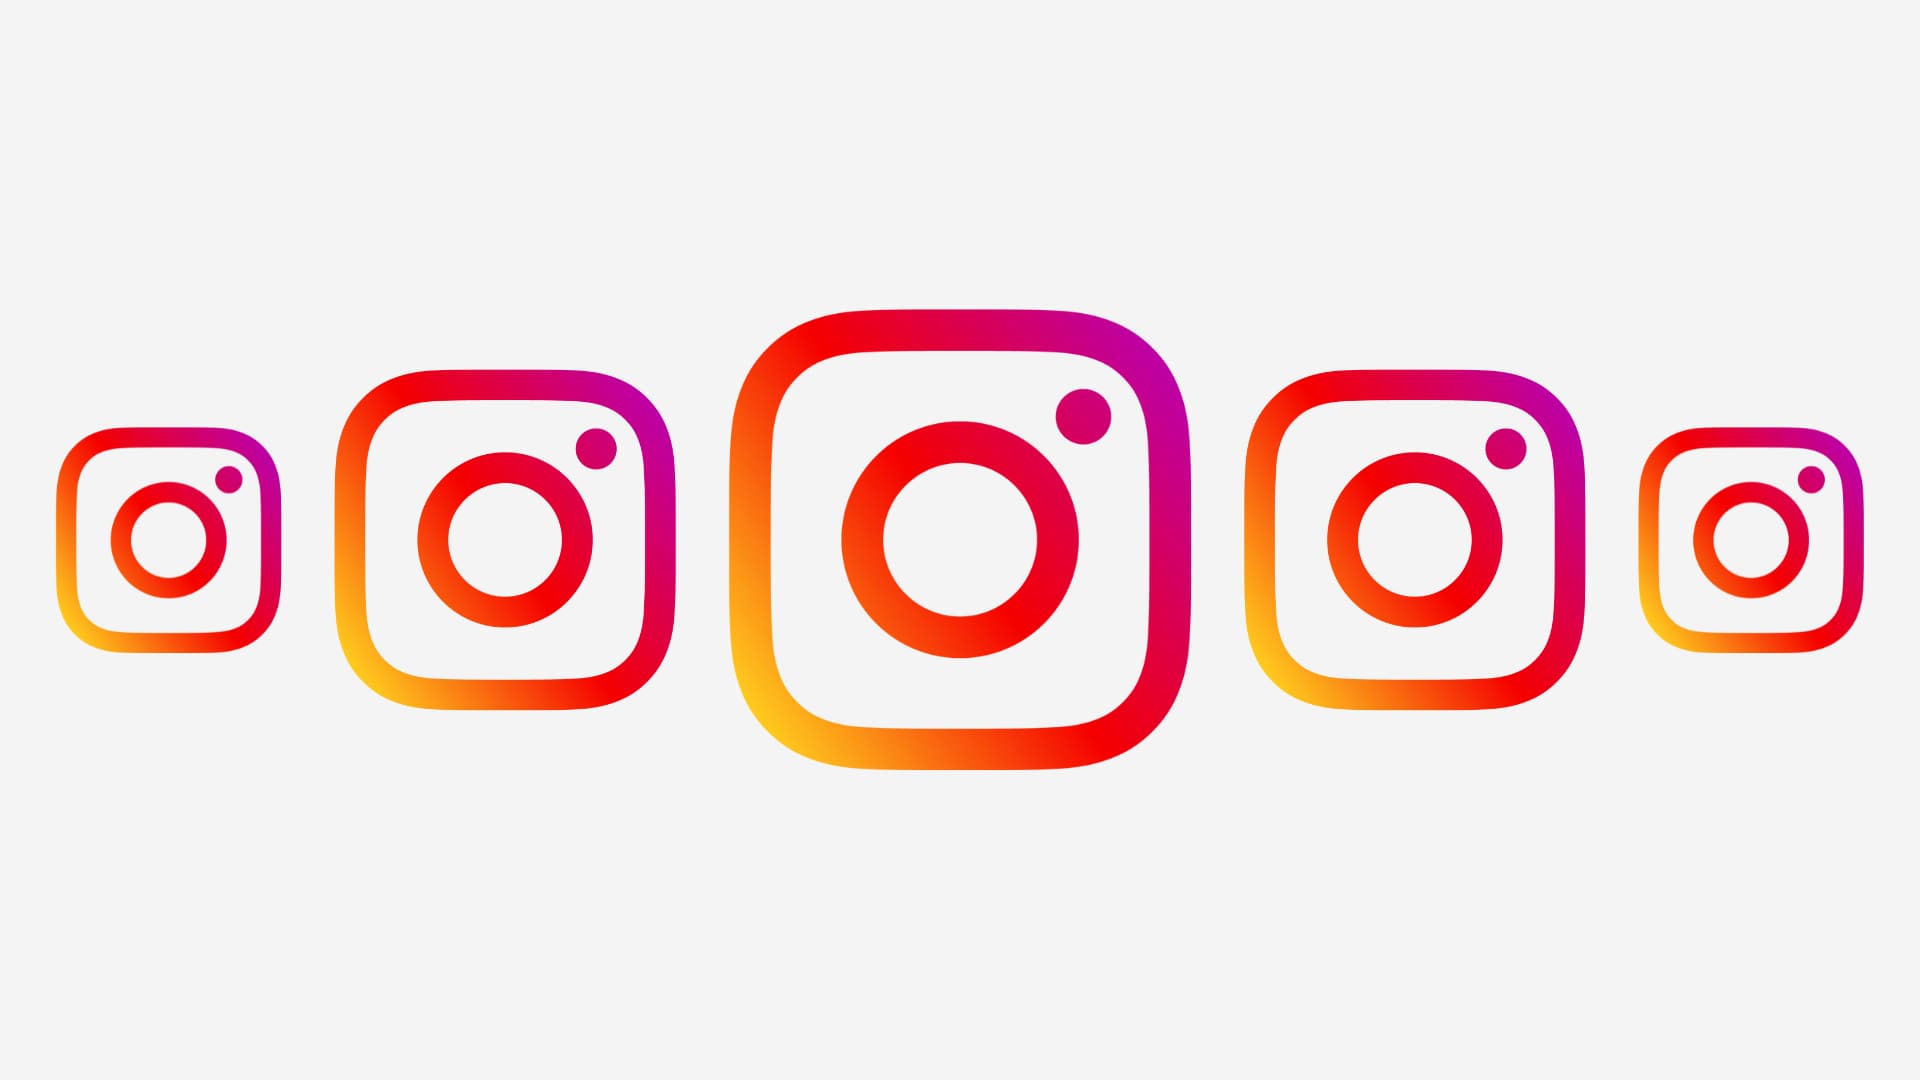 Multiple Instagram logos placed next to each other